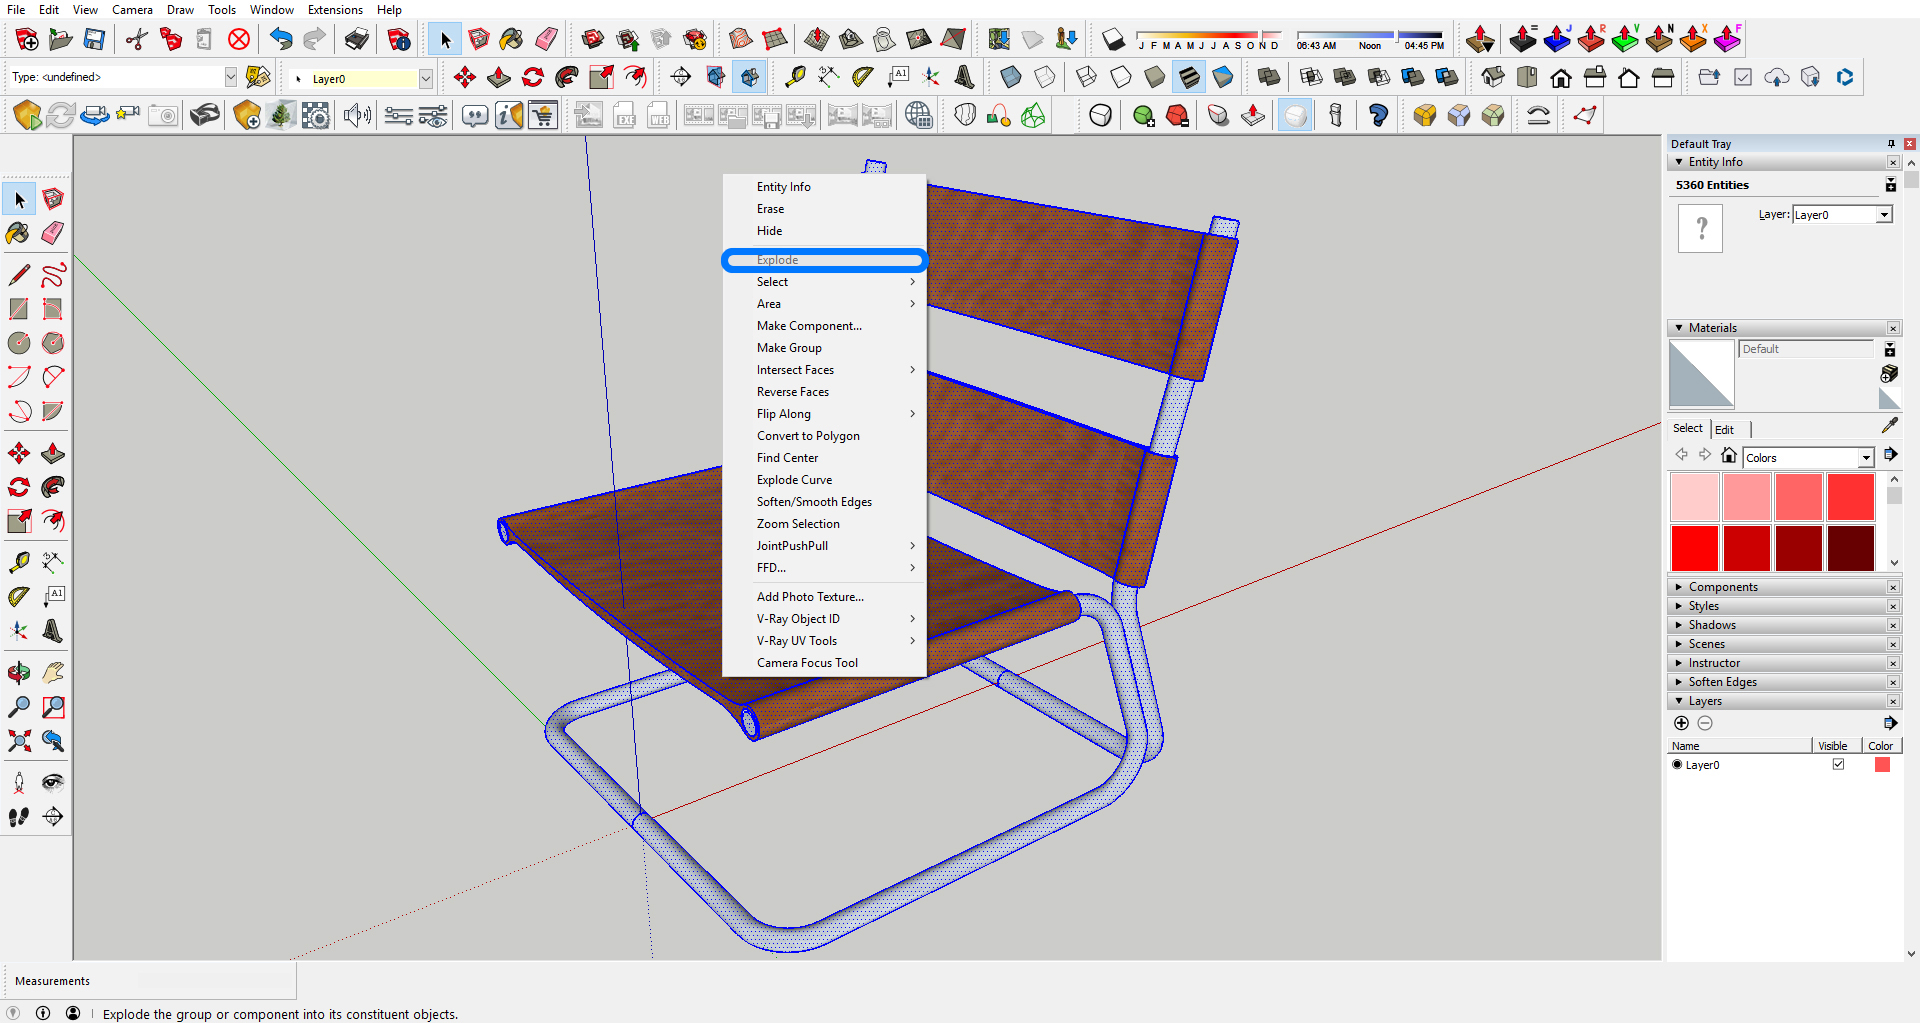 It indicates how to explode a grouped sketchup model.